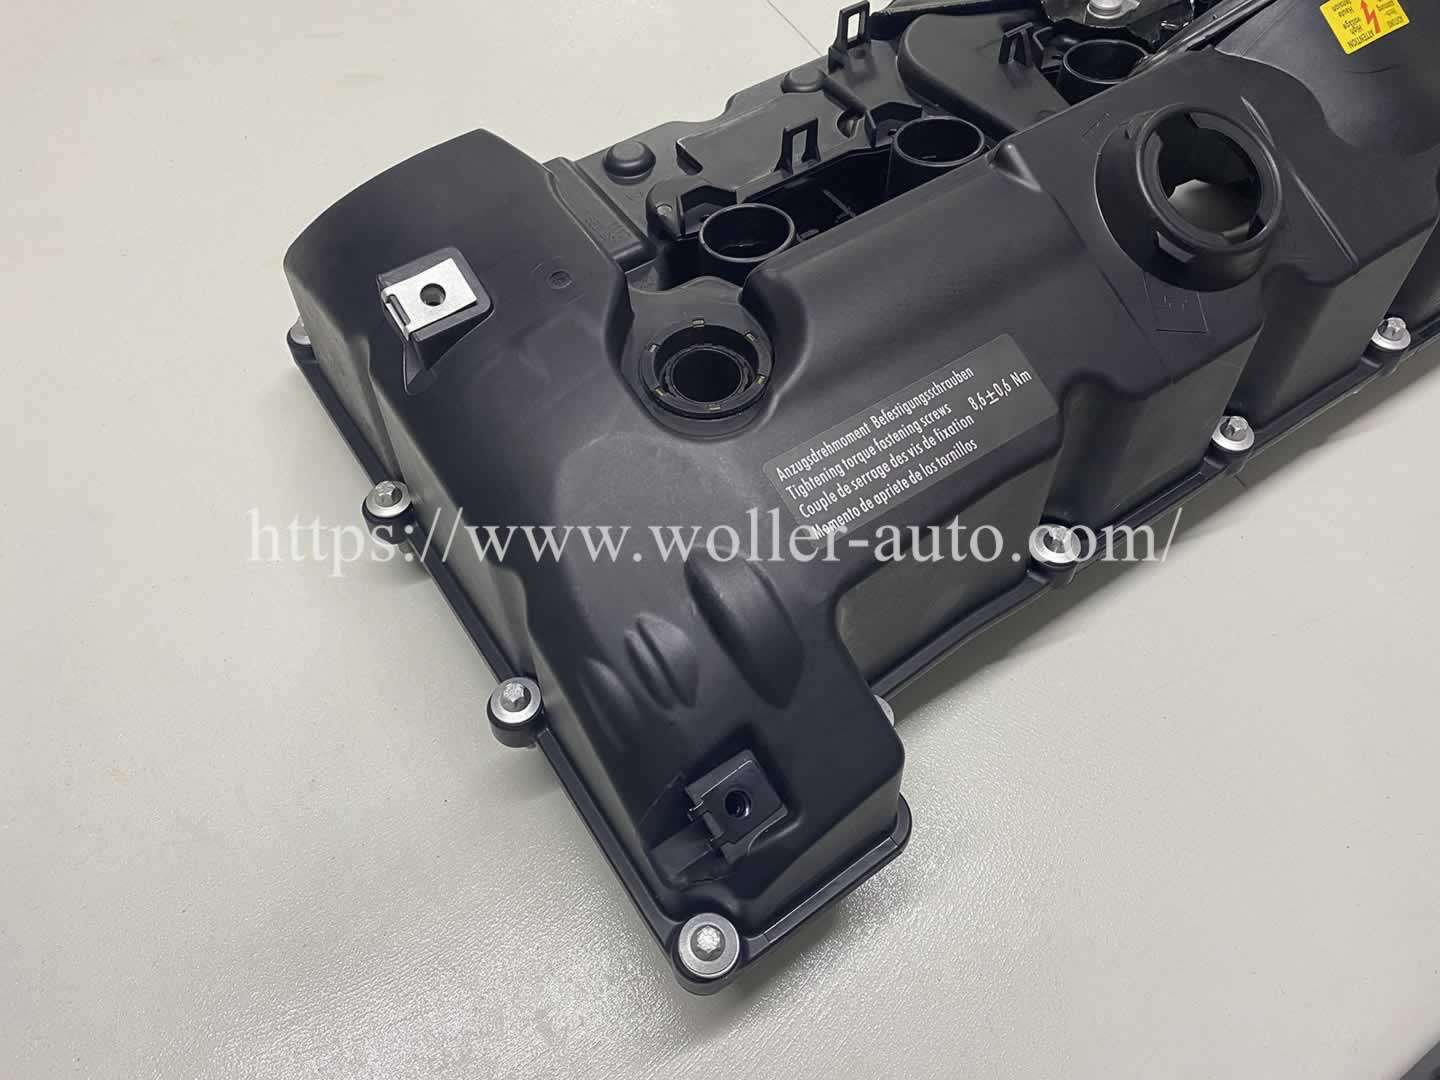 Engine Valve Cover OE 11127552281 for BMW N52